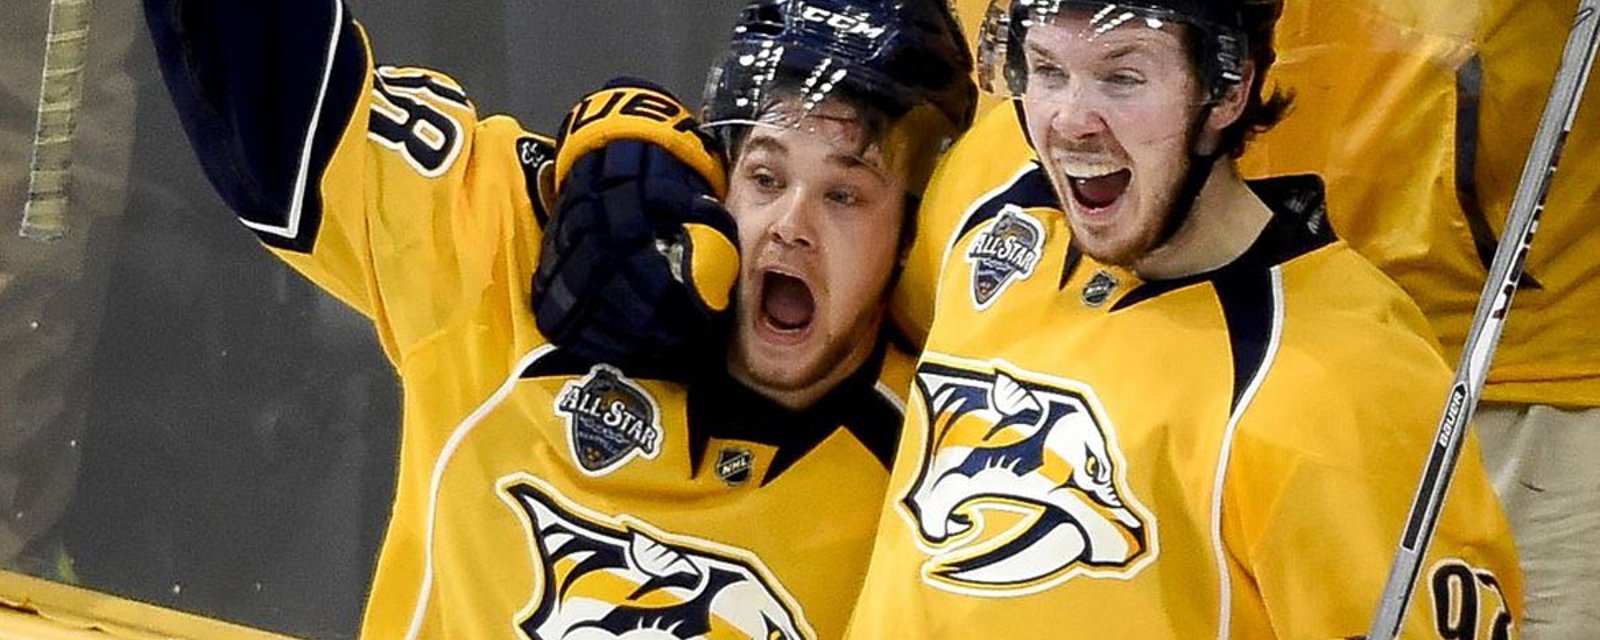 Must see: Arvidsson's celebration is catching on!